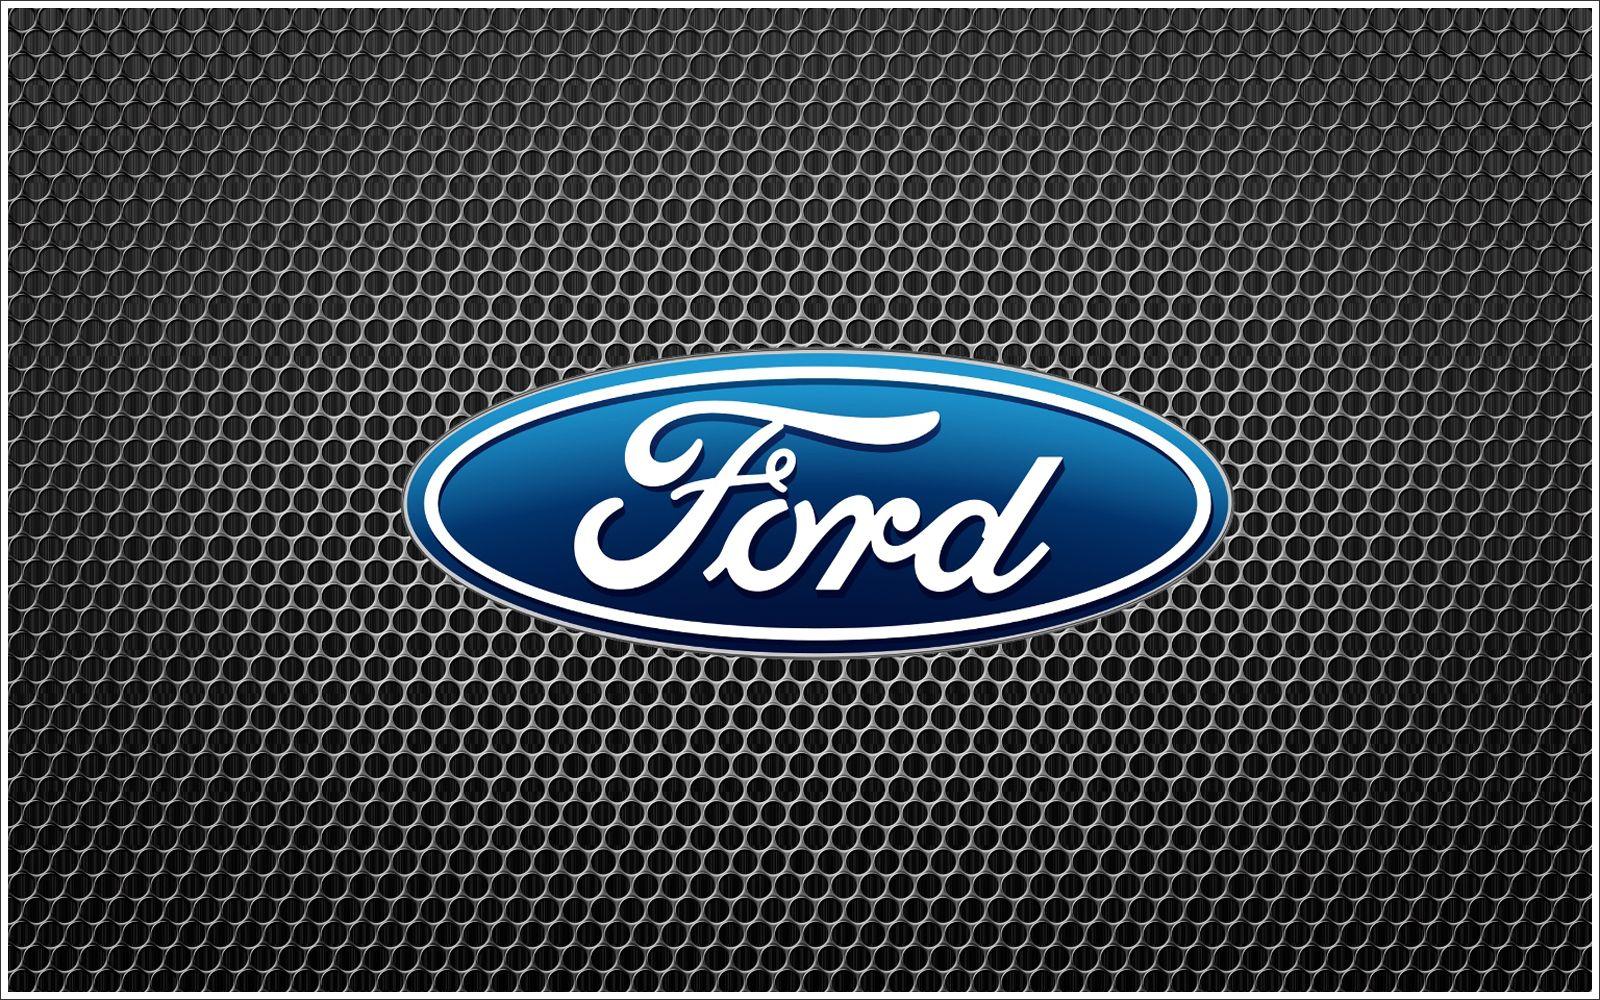 Brand with Blue Oval Logo - Ford Logo Meaning and History, latest models | World Cars Brands